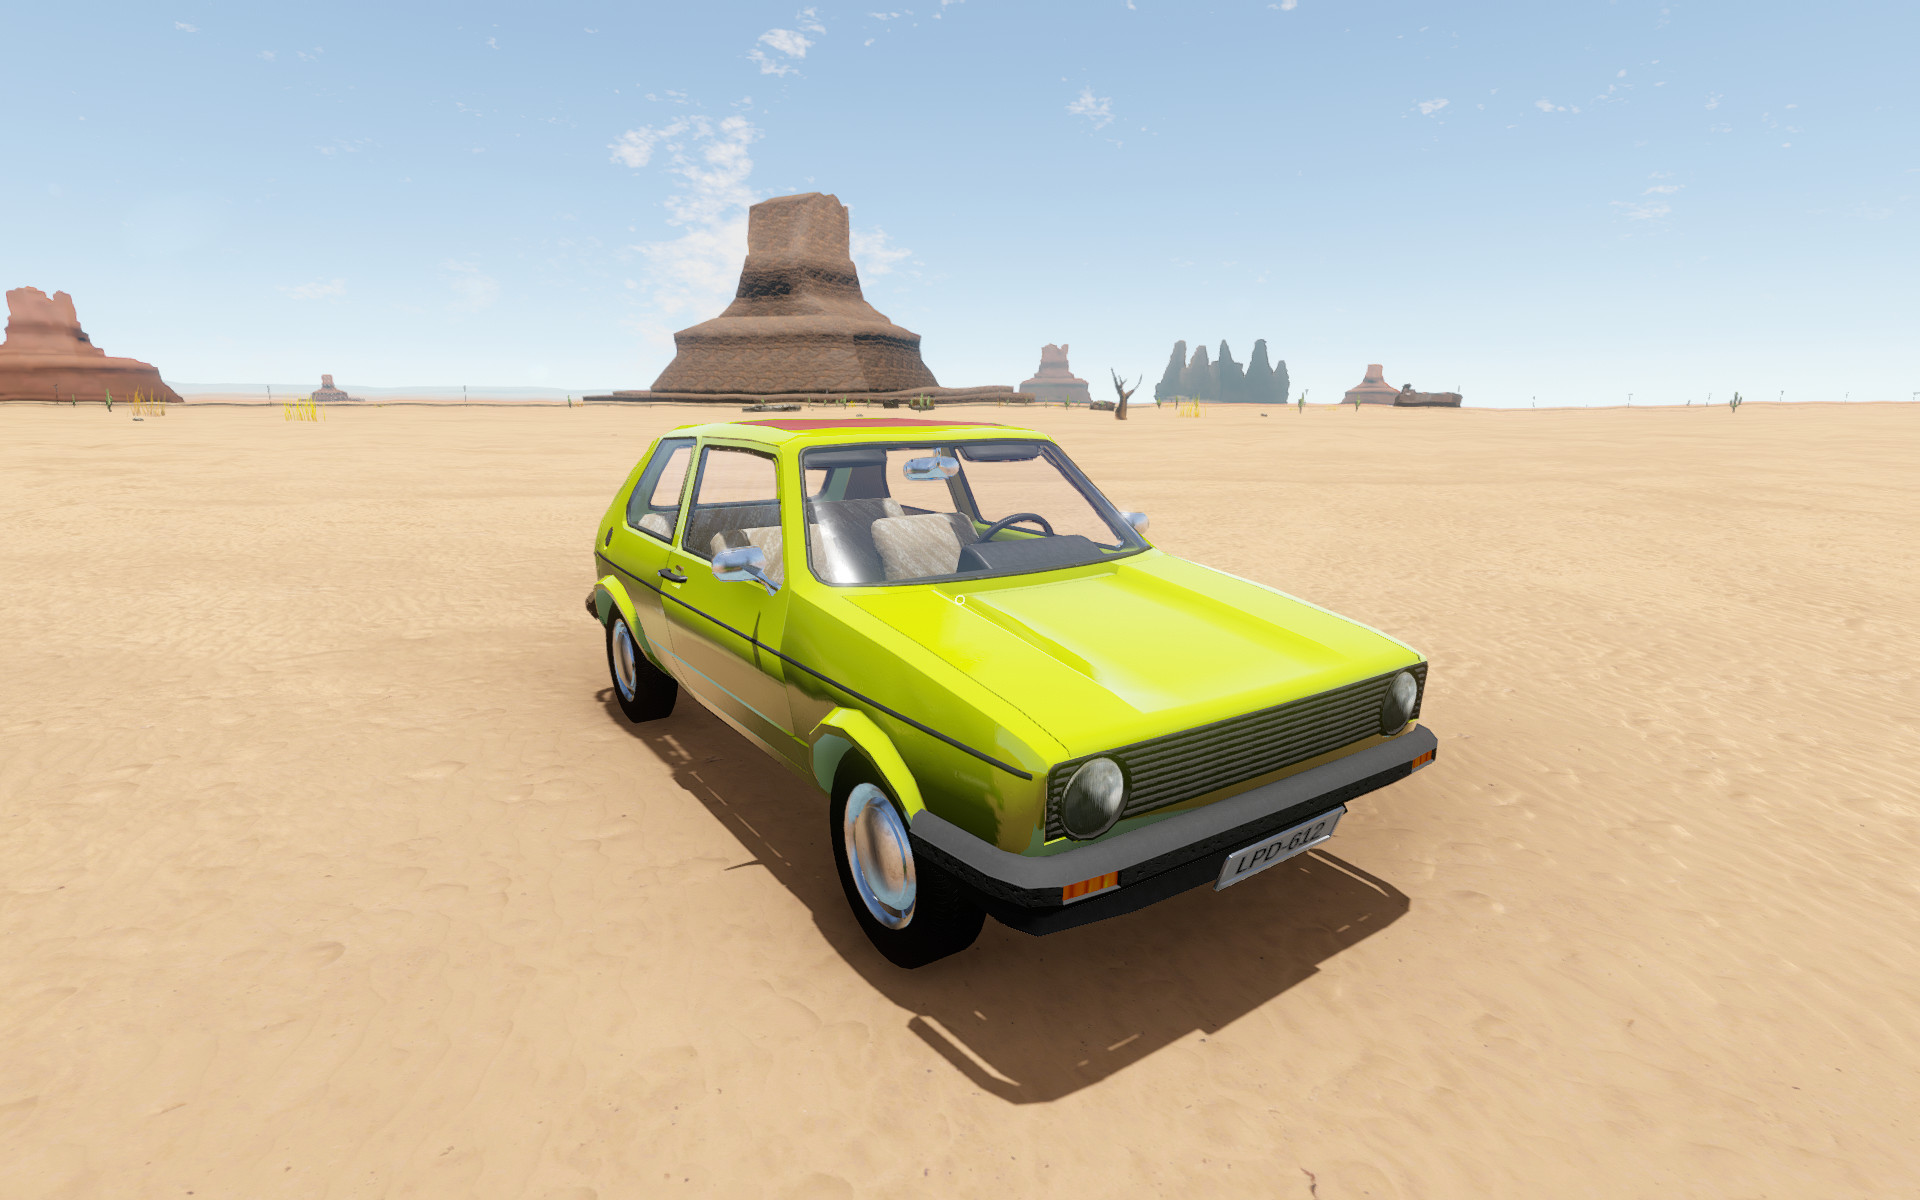 The Long Drive - All Types of Vehicle Wiki Guide - VW Golf - EA811E5